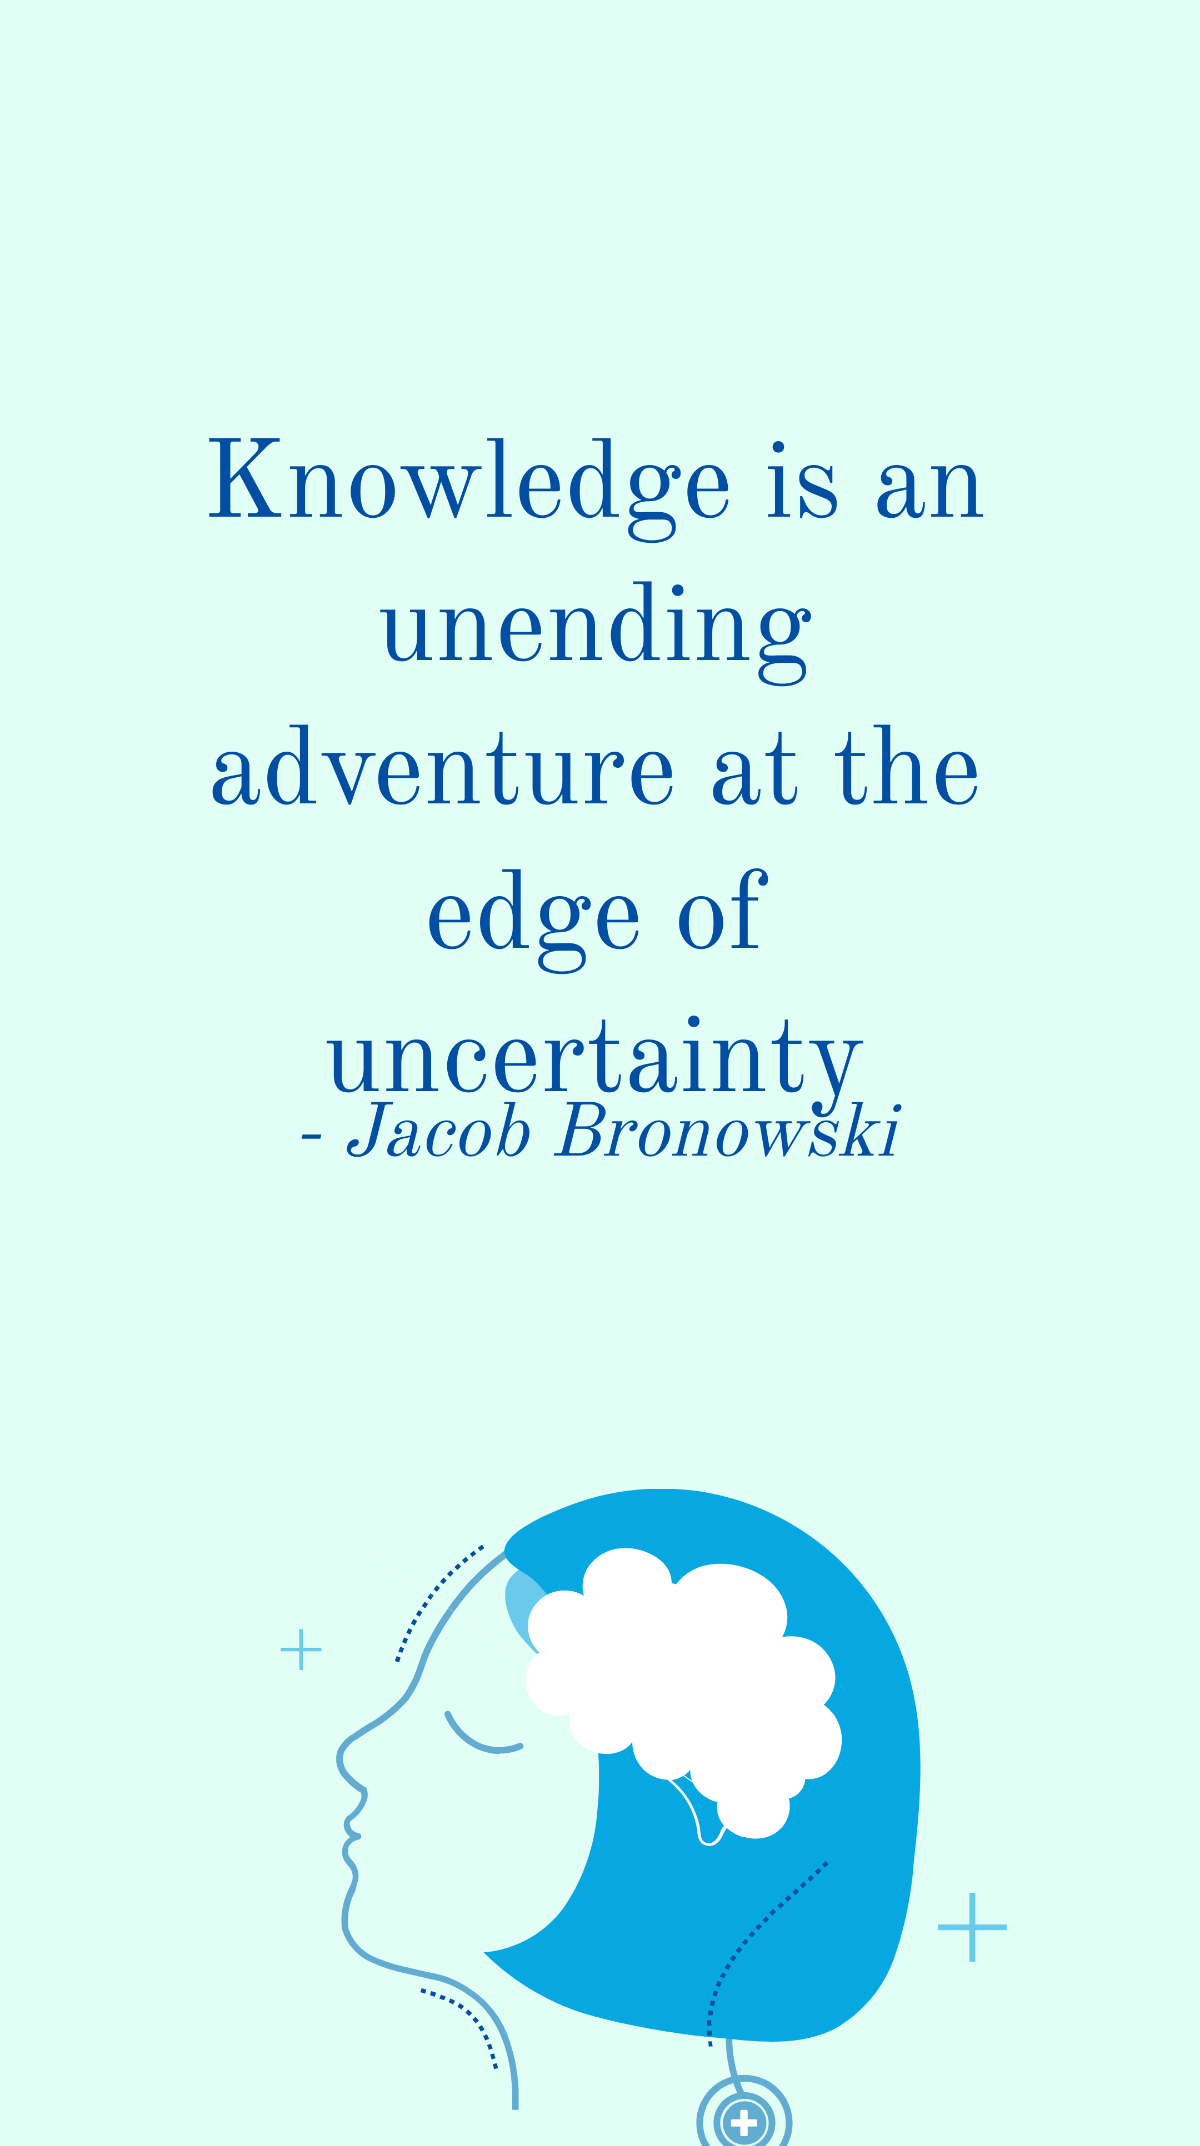 Jacob Bronowski - Knowledge is an unending adventure at the edge of uncertainty Template